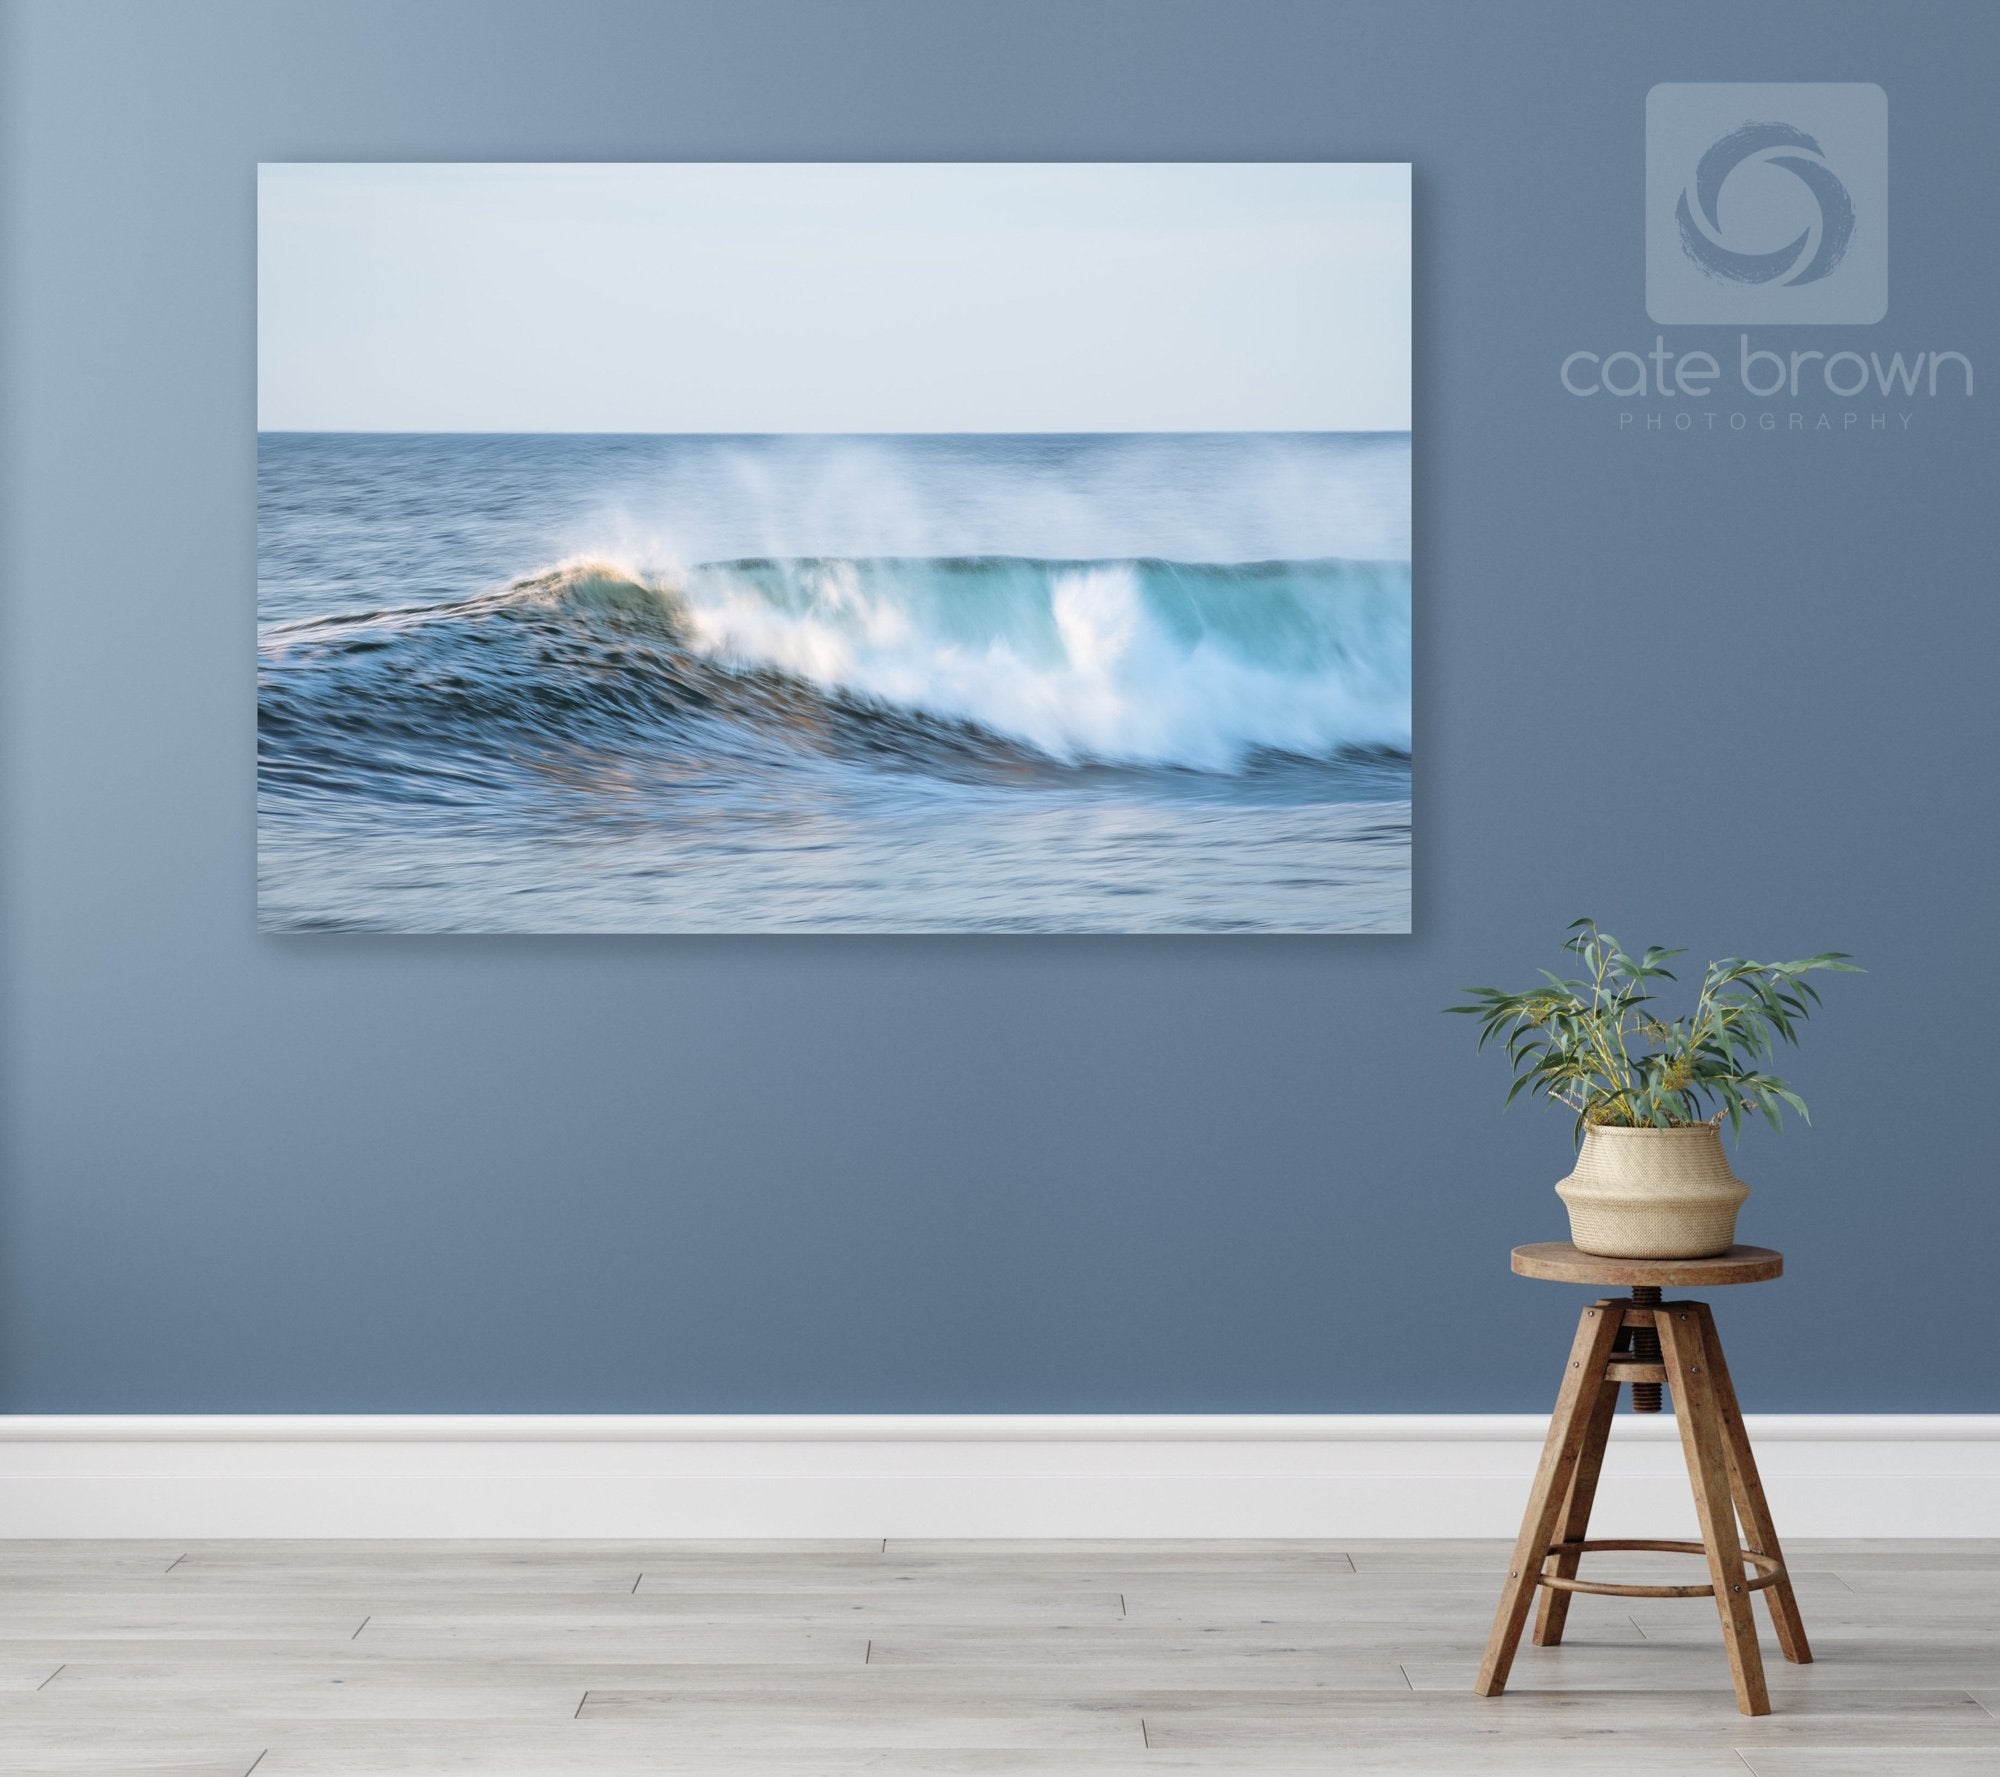 Cate Brown Photo Beautiful Chaos  //  Ocean Photography Made to Order Ocean Fine Art